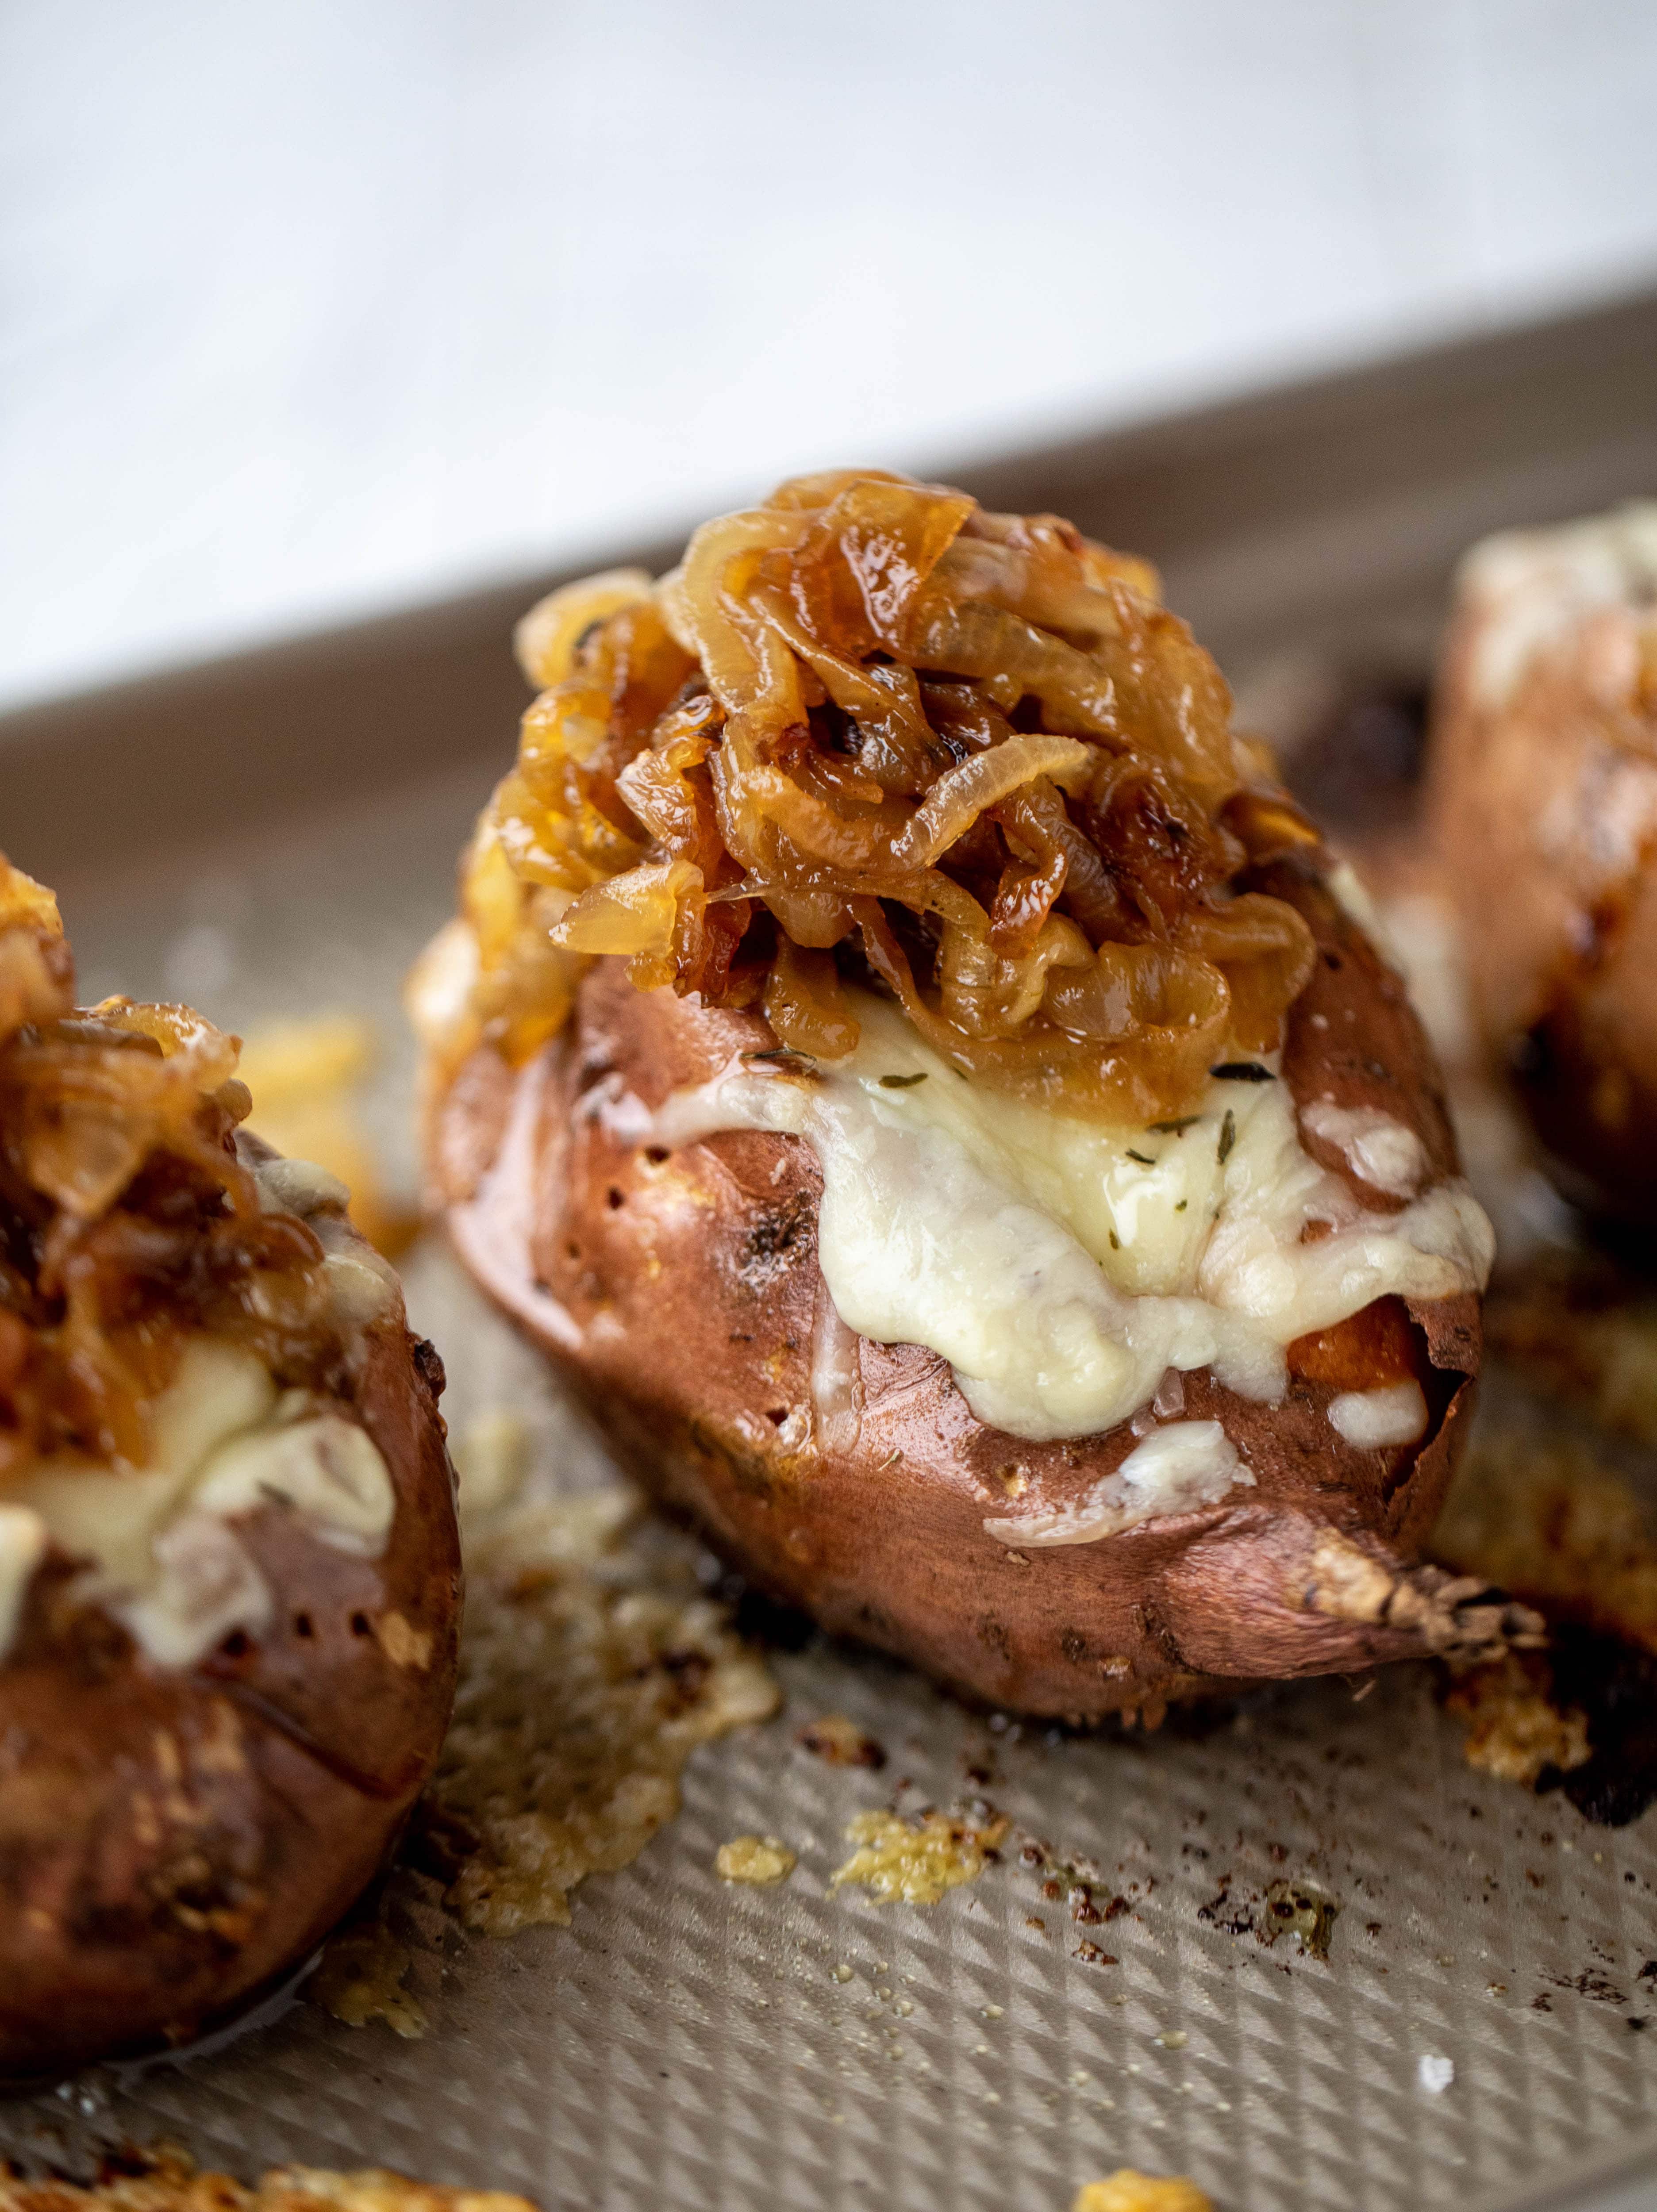 These french onion stuffed sweet potatoes are slow roasted and topped with gruyere cheese and caramelized onions. Garlic butter bread crumbs finish them!